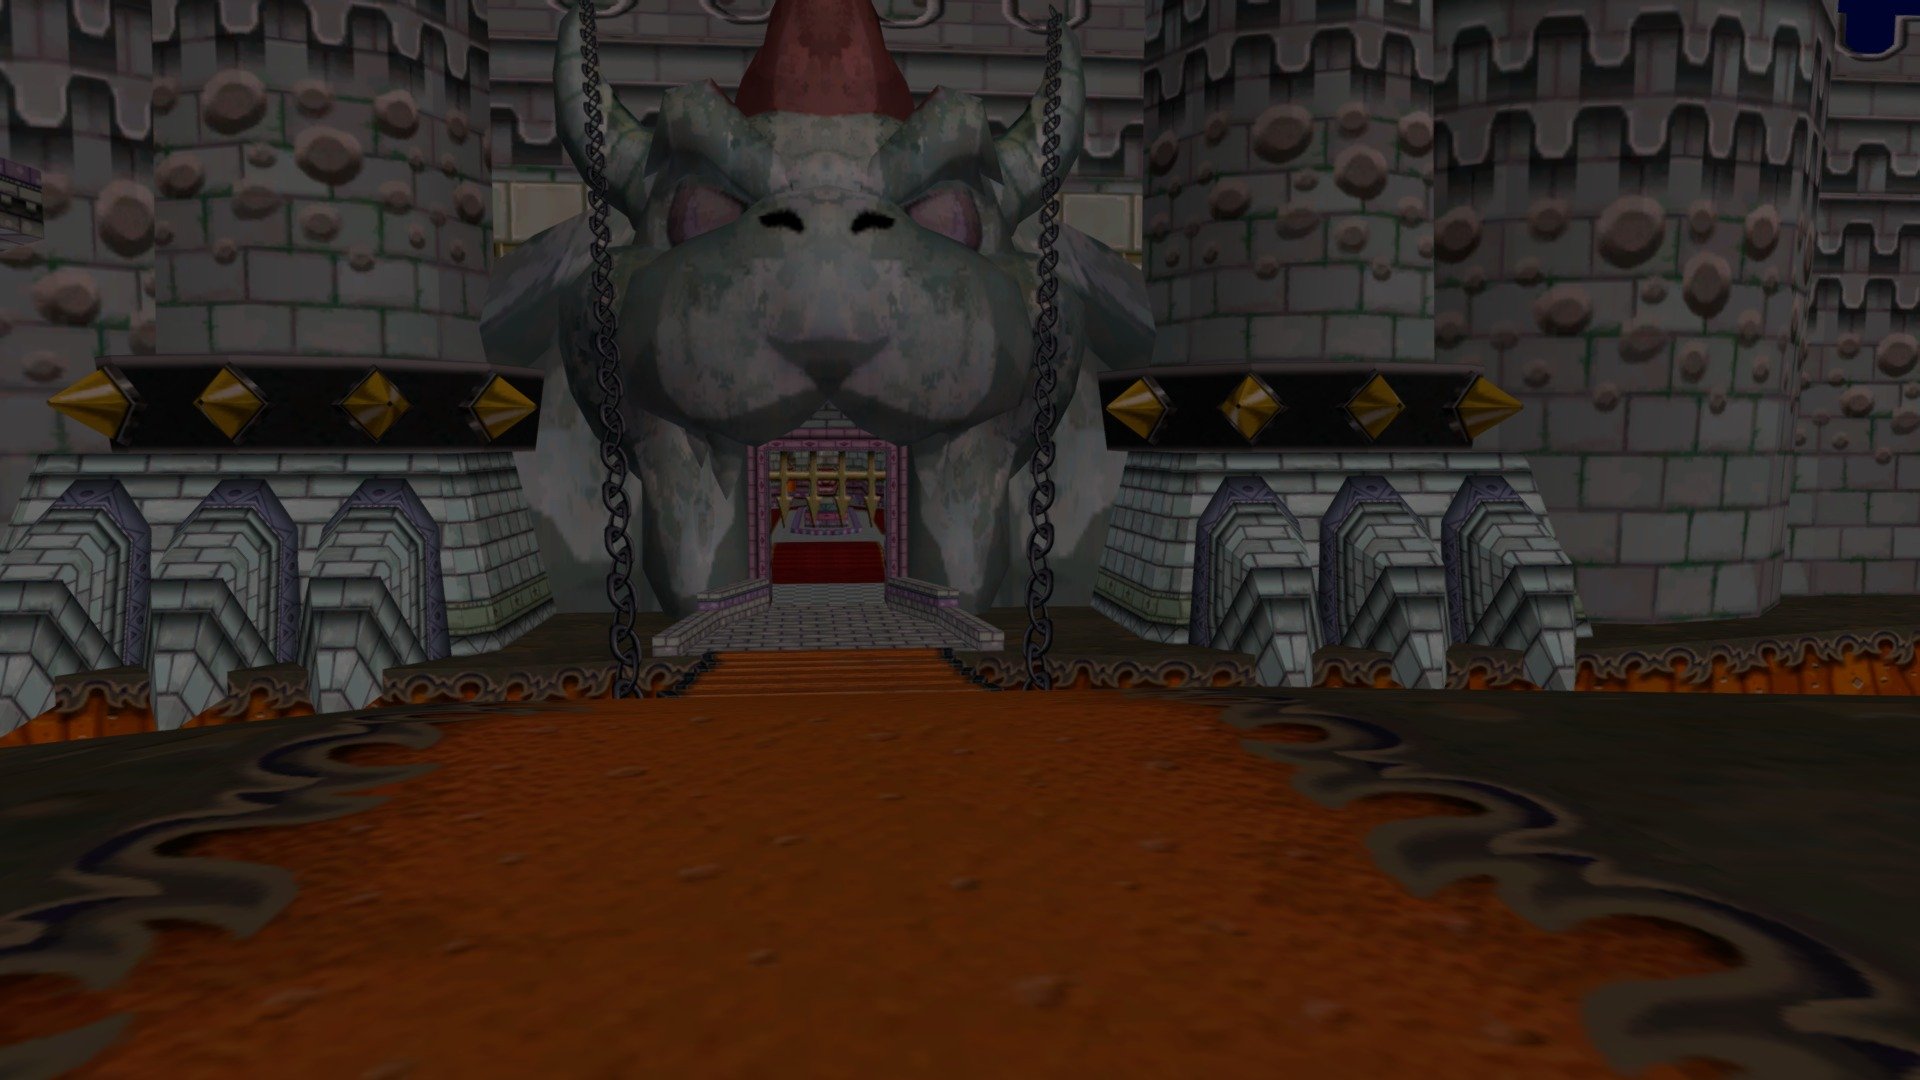 N64 Bowser Castle Download Free 3d Model By Irons3th 6935